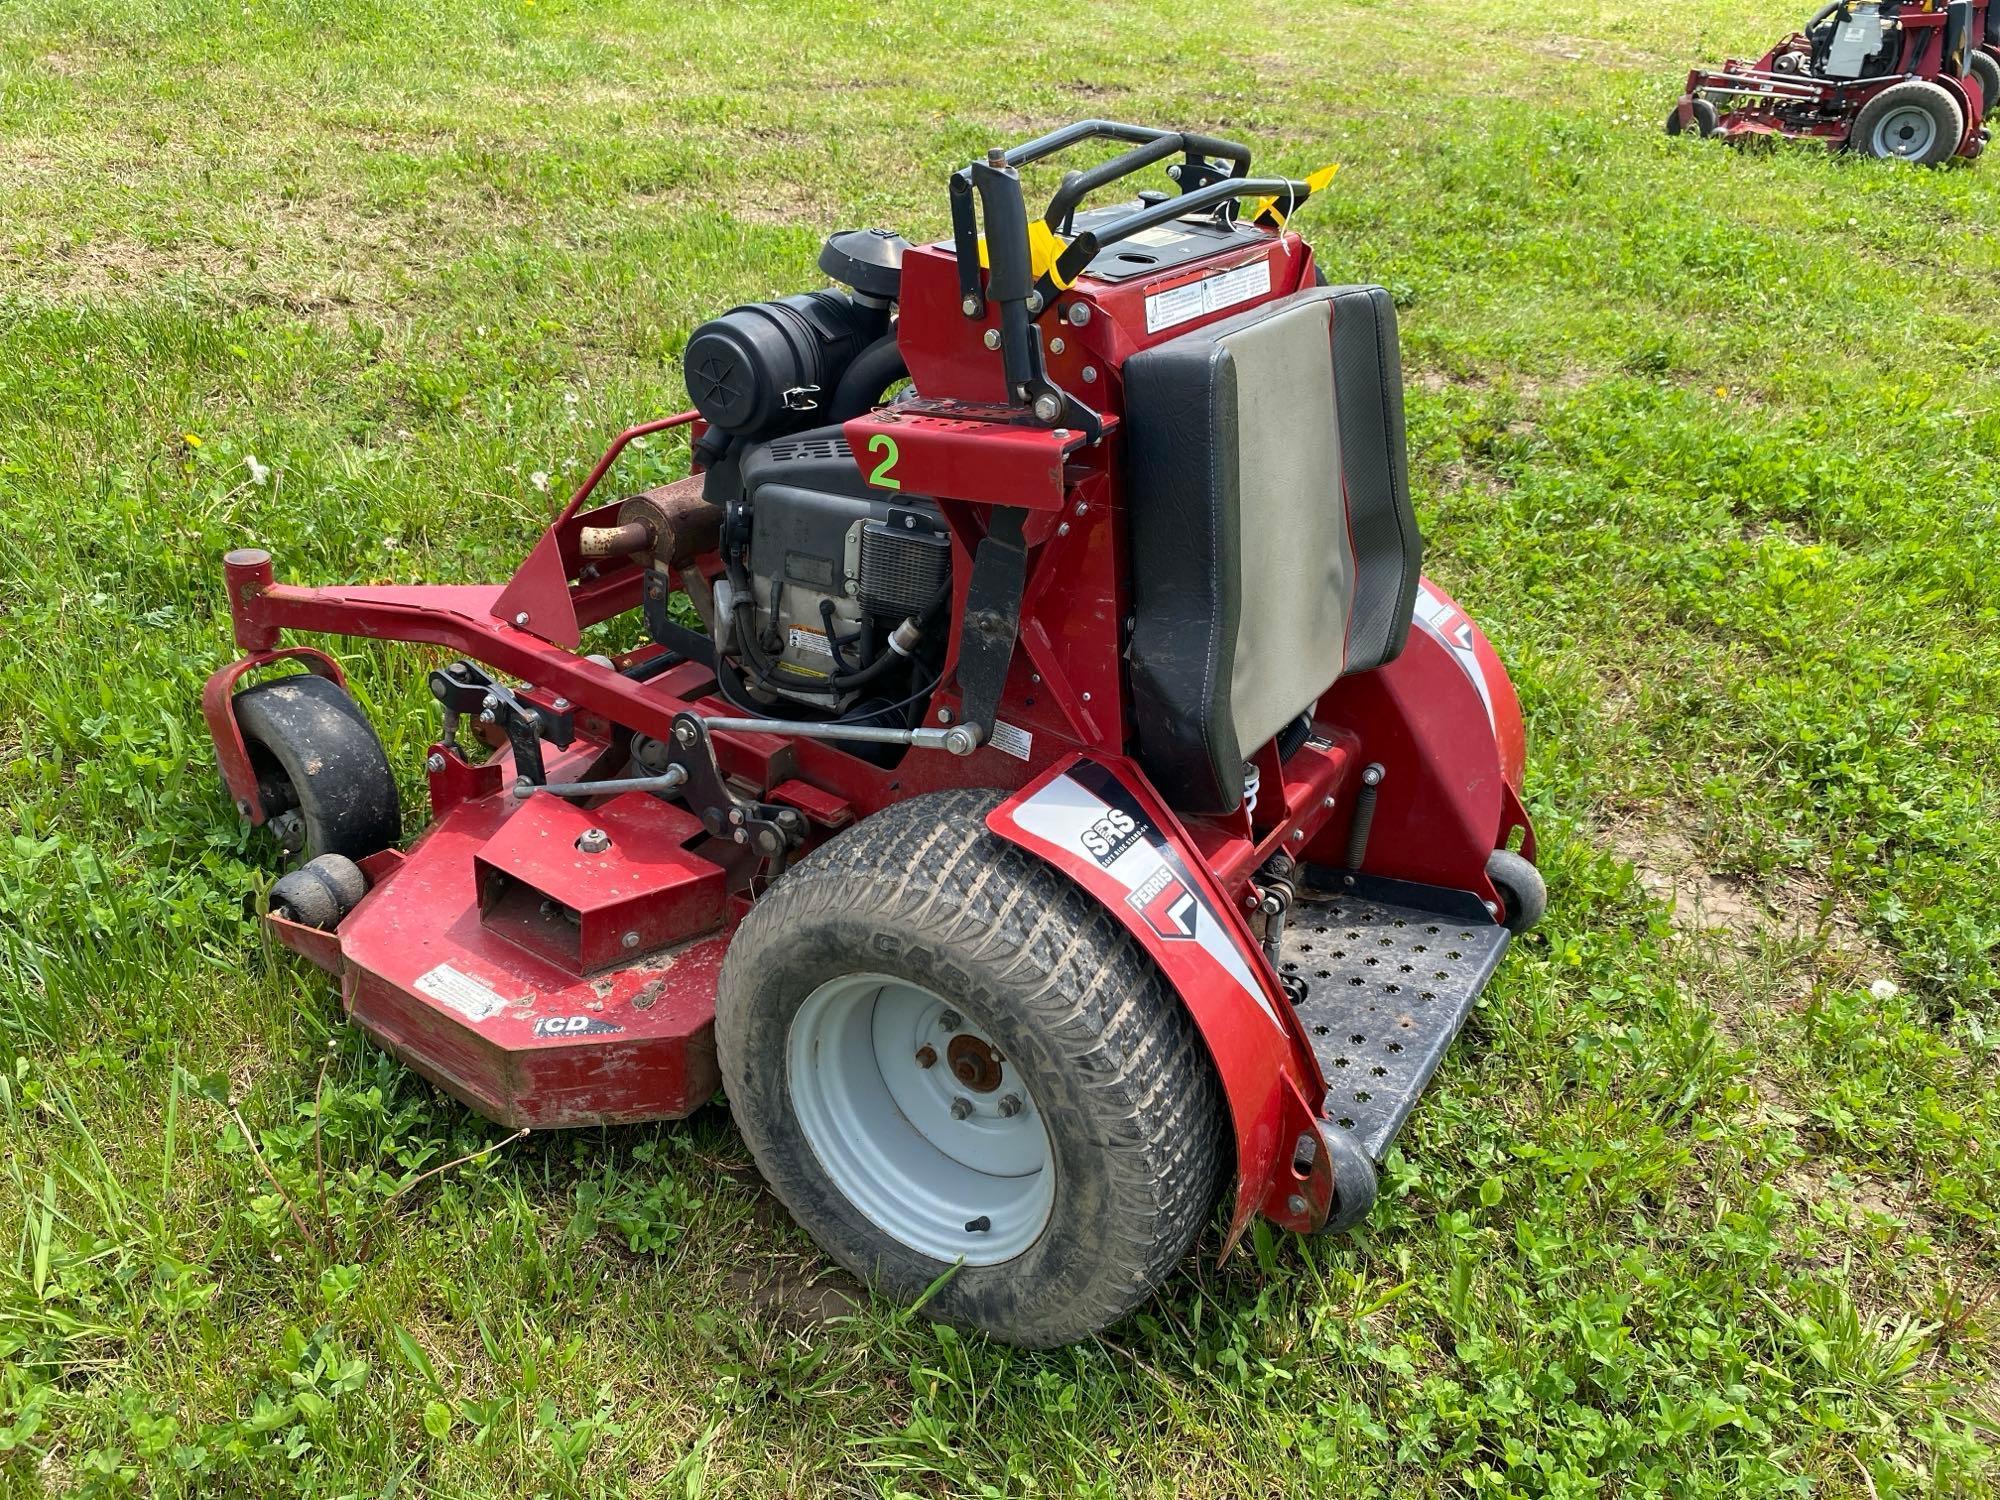 FERRIS SRS2 COMMERCIAL MOWER SN:3699 powered by gas engine, equipped with 52in. Cutting deck, zero